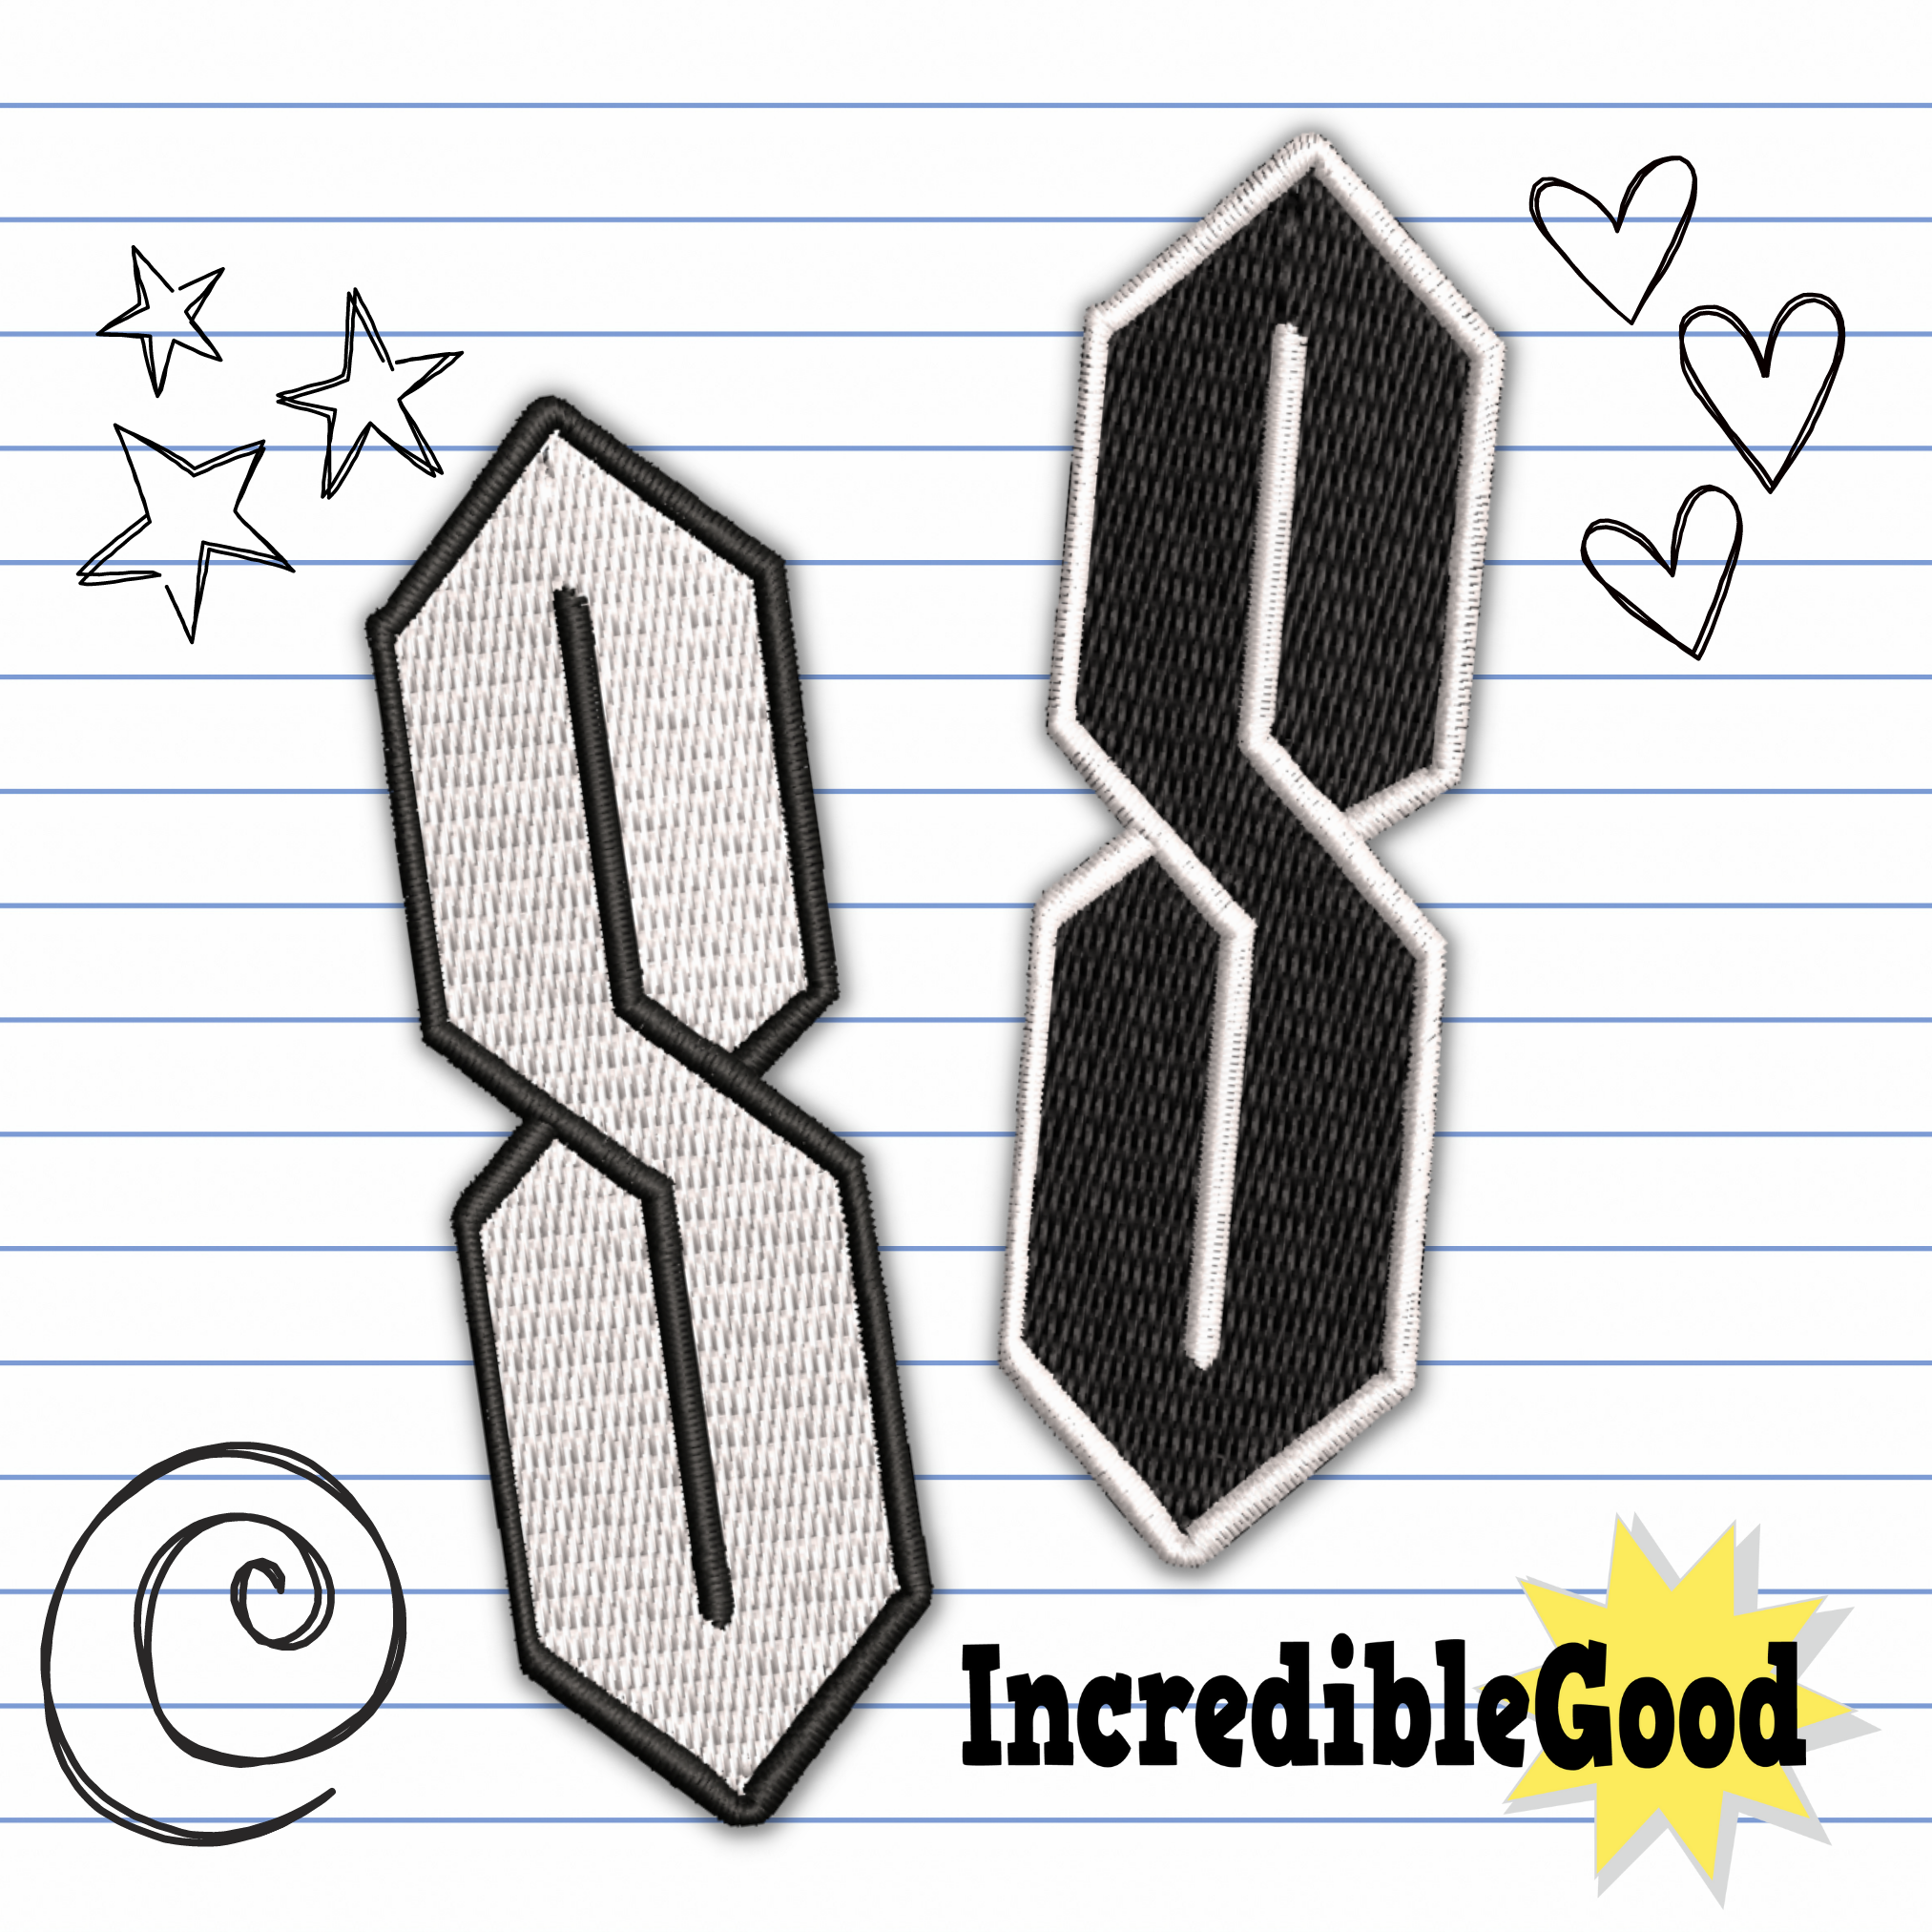 That Cool "S" Morbius Strip Thing From School Embroidered Iron-on Patch